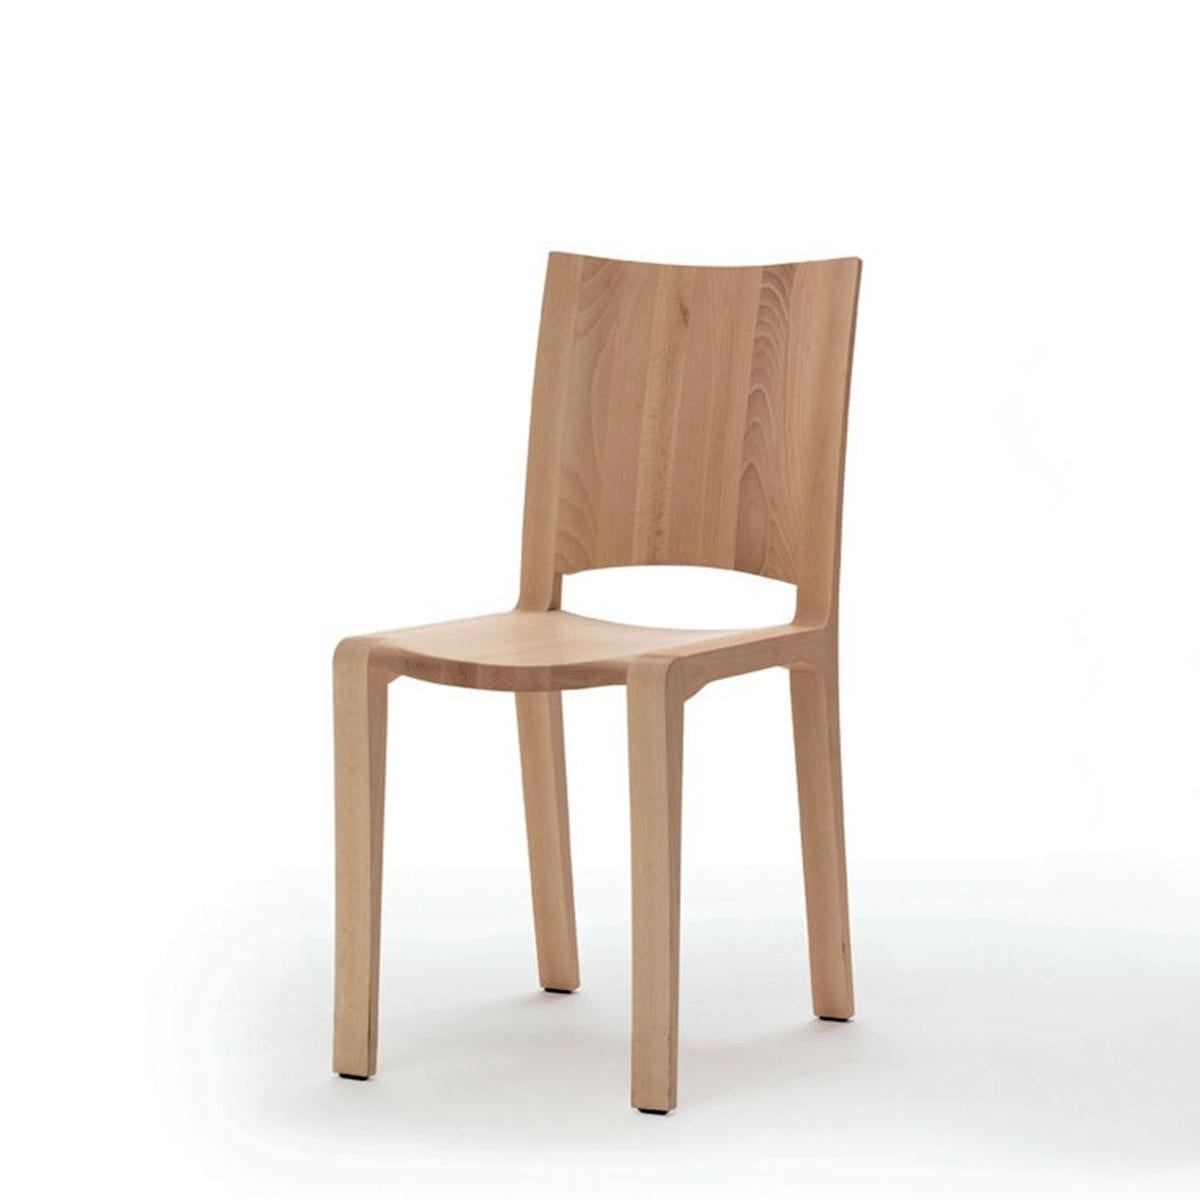 Chair Adria oak with all structure
entirely in solid oakwood.